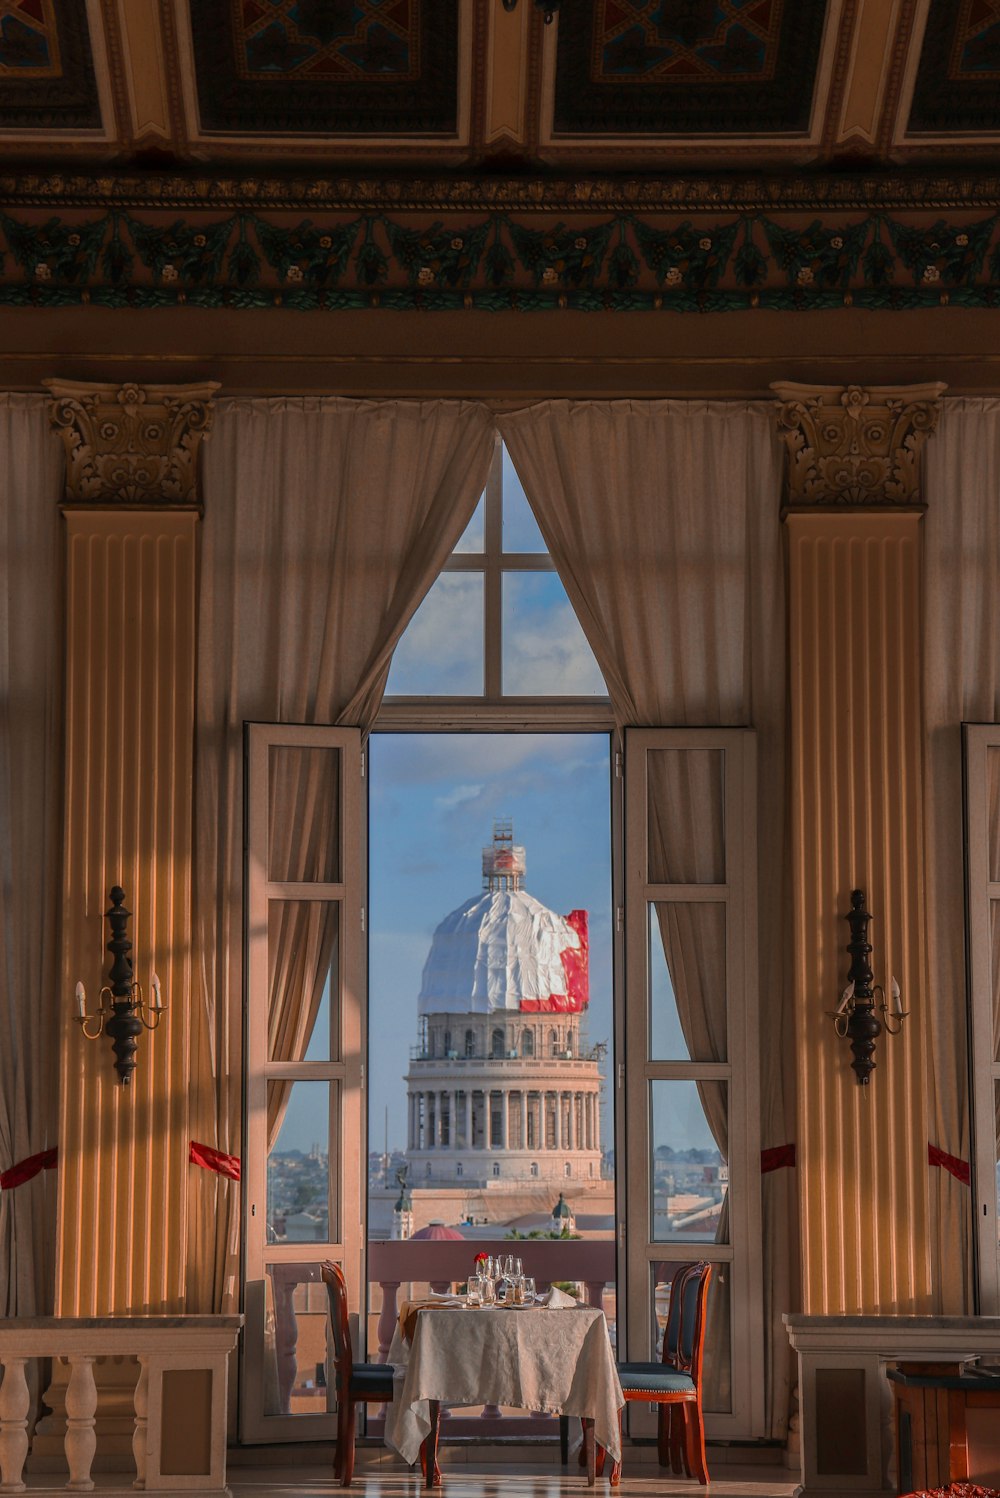 a view of the capital building through a window